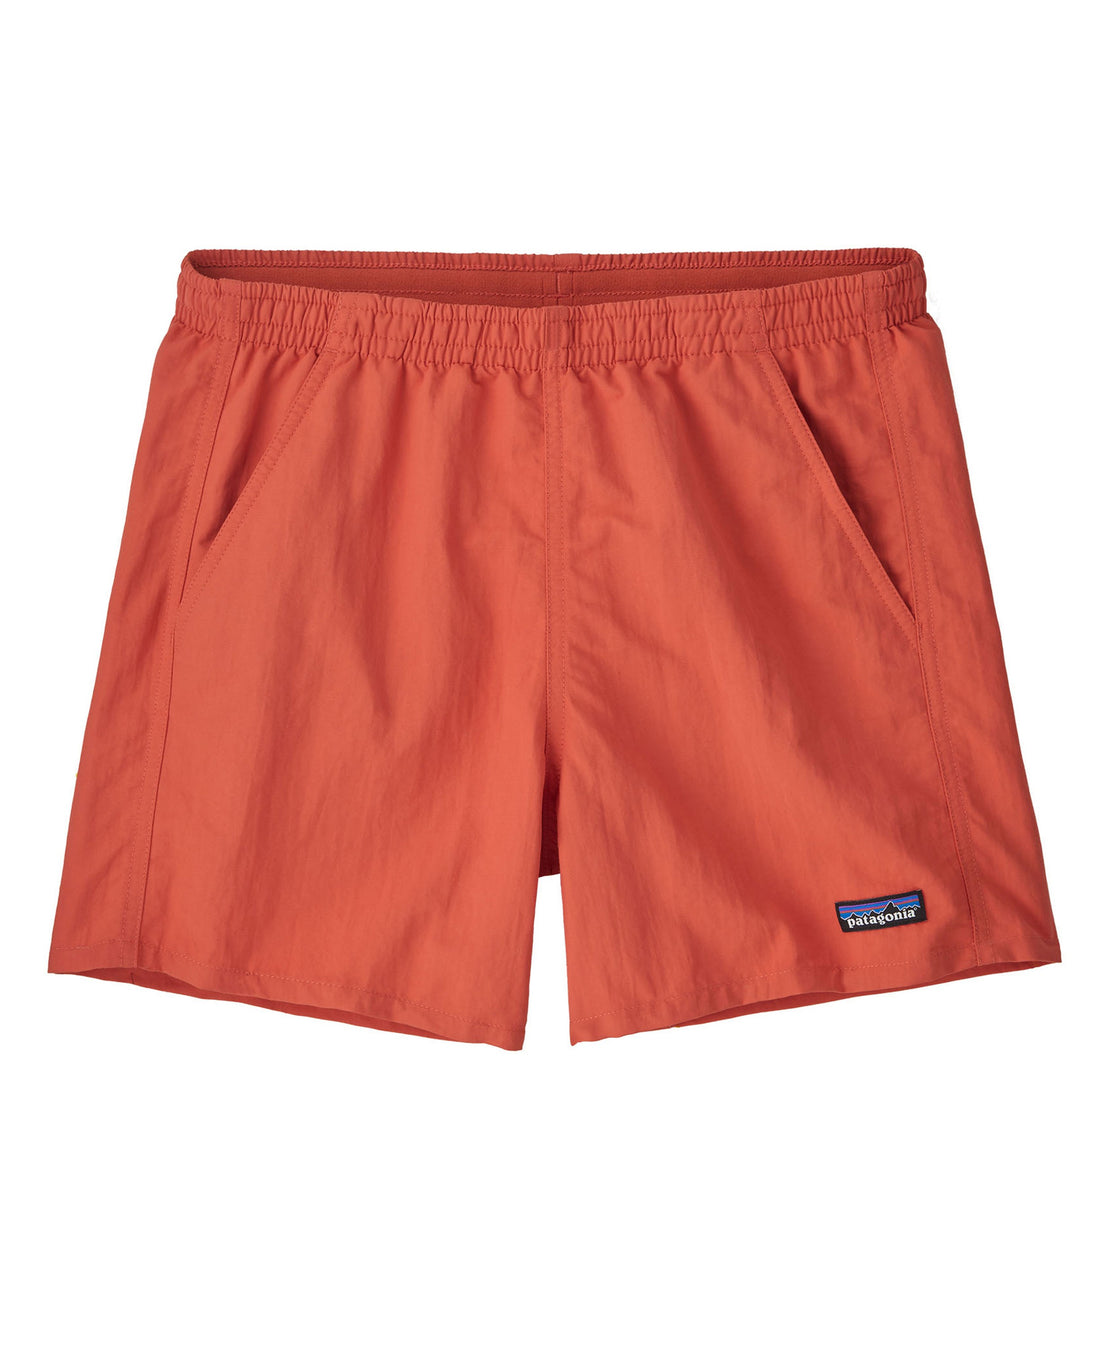 Baggies Shorts 5in - Pimento Red